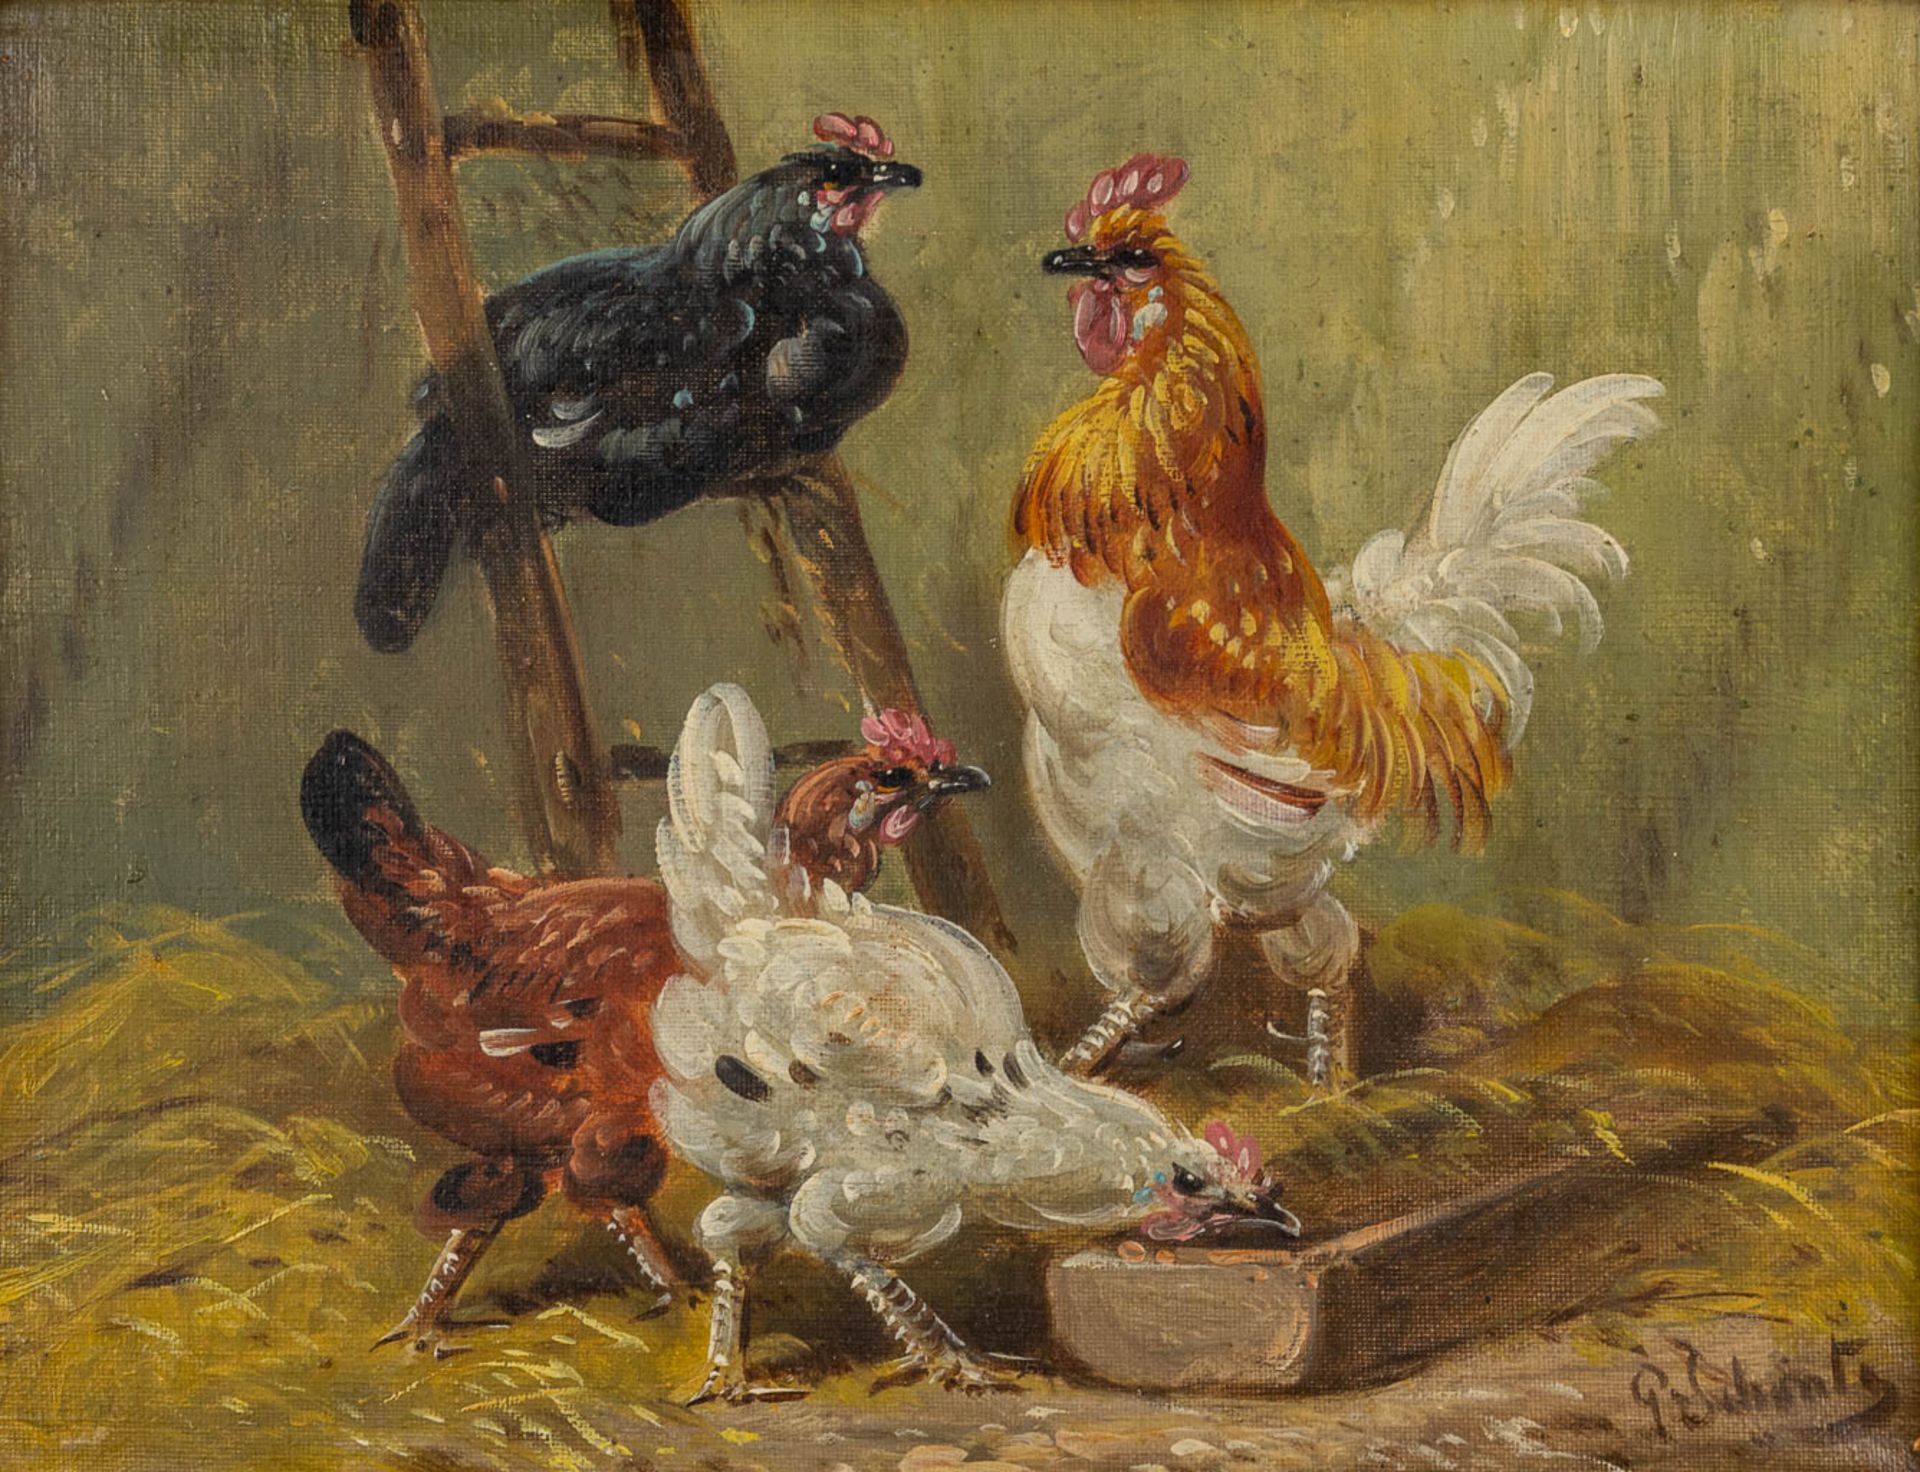 Paul SCHOUTEN (1860-1922) 'Chicken' a pair of pendant paintings, oil on canvas. (W:32,5 x H:24,5 cm) - Image 4 of 9